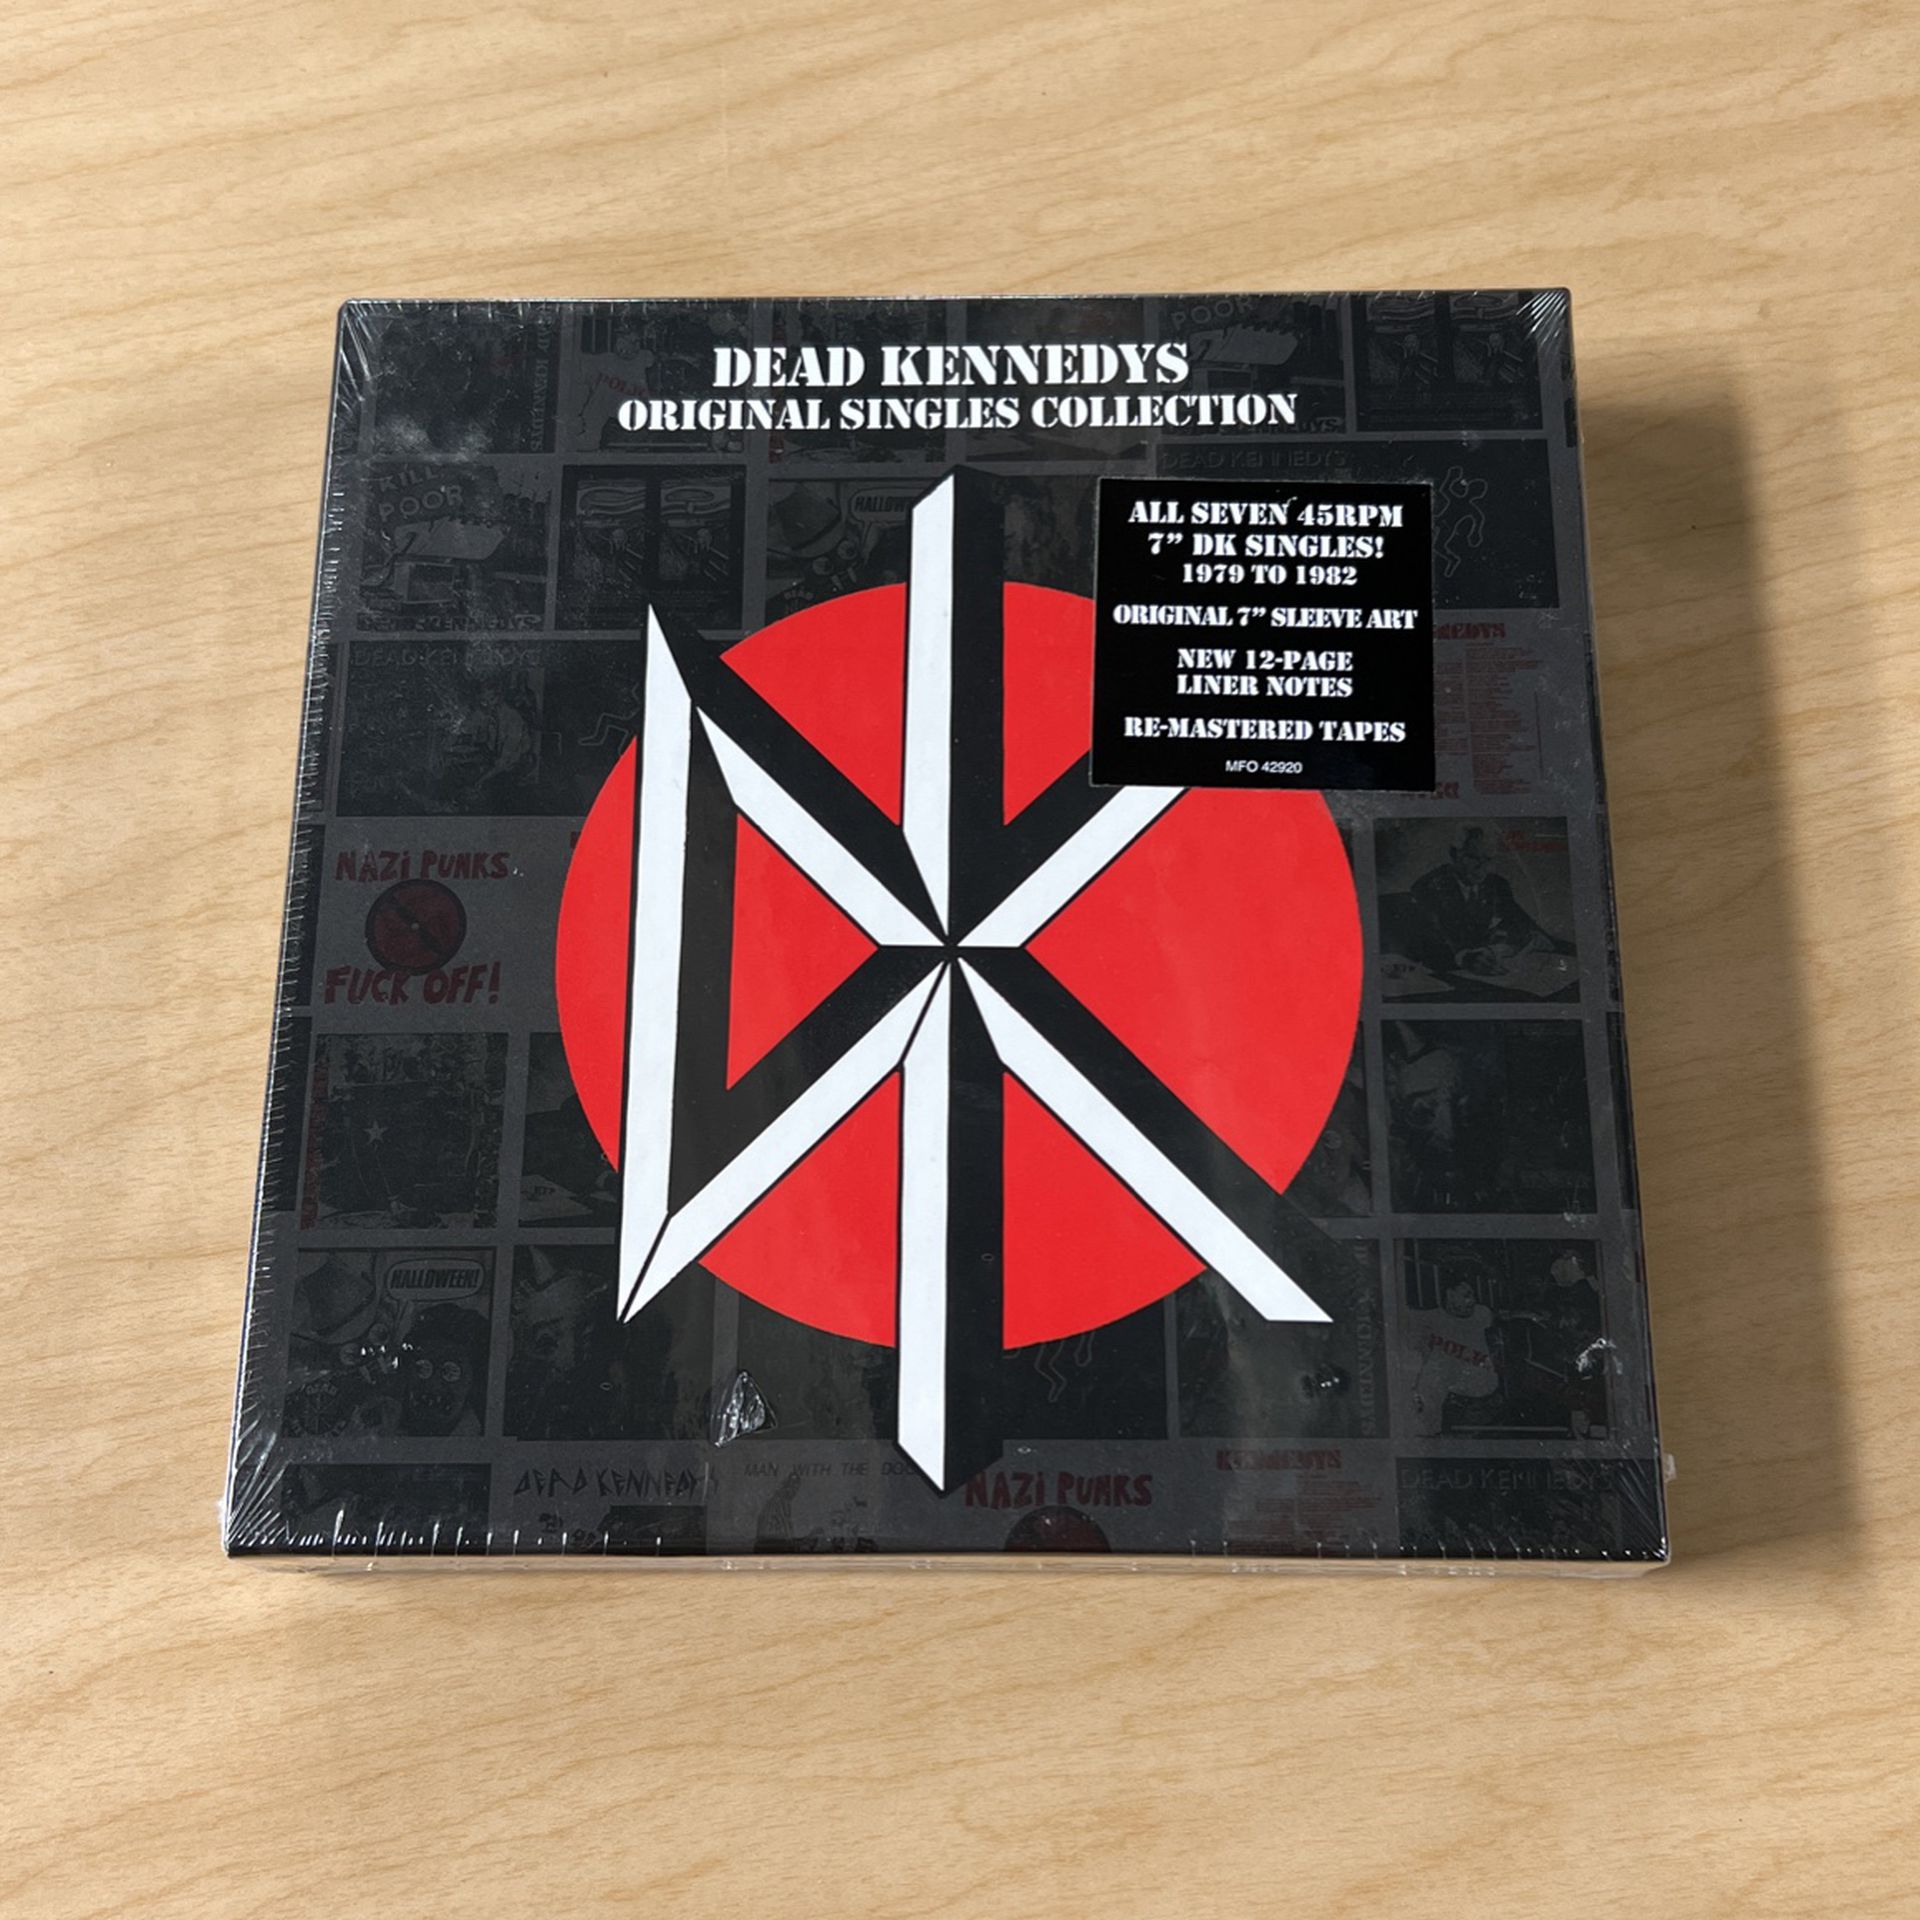 New Sealed Out Of Print Dead Kennedys Box Set Vinyl Records 